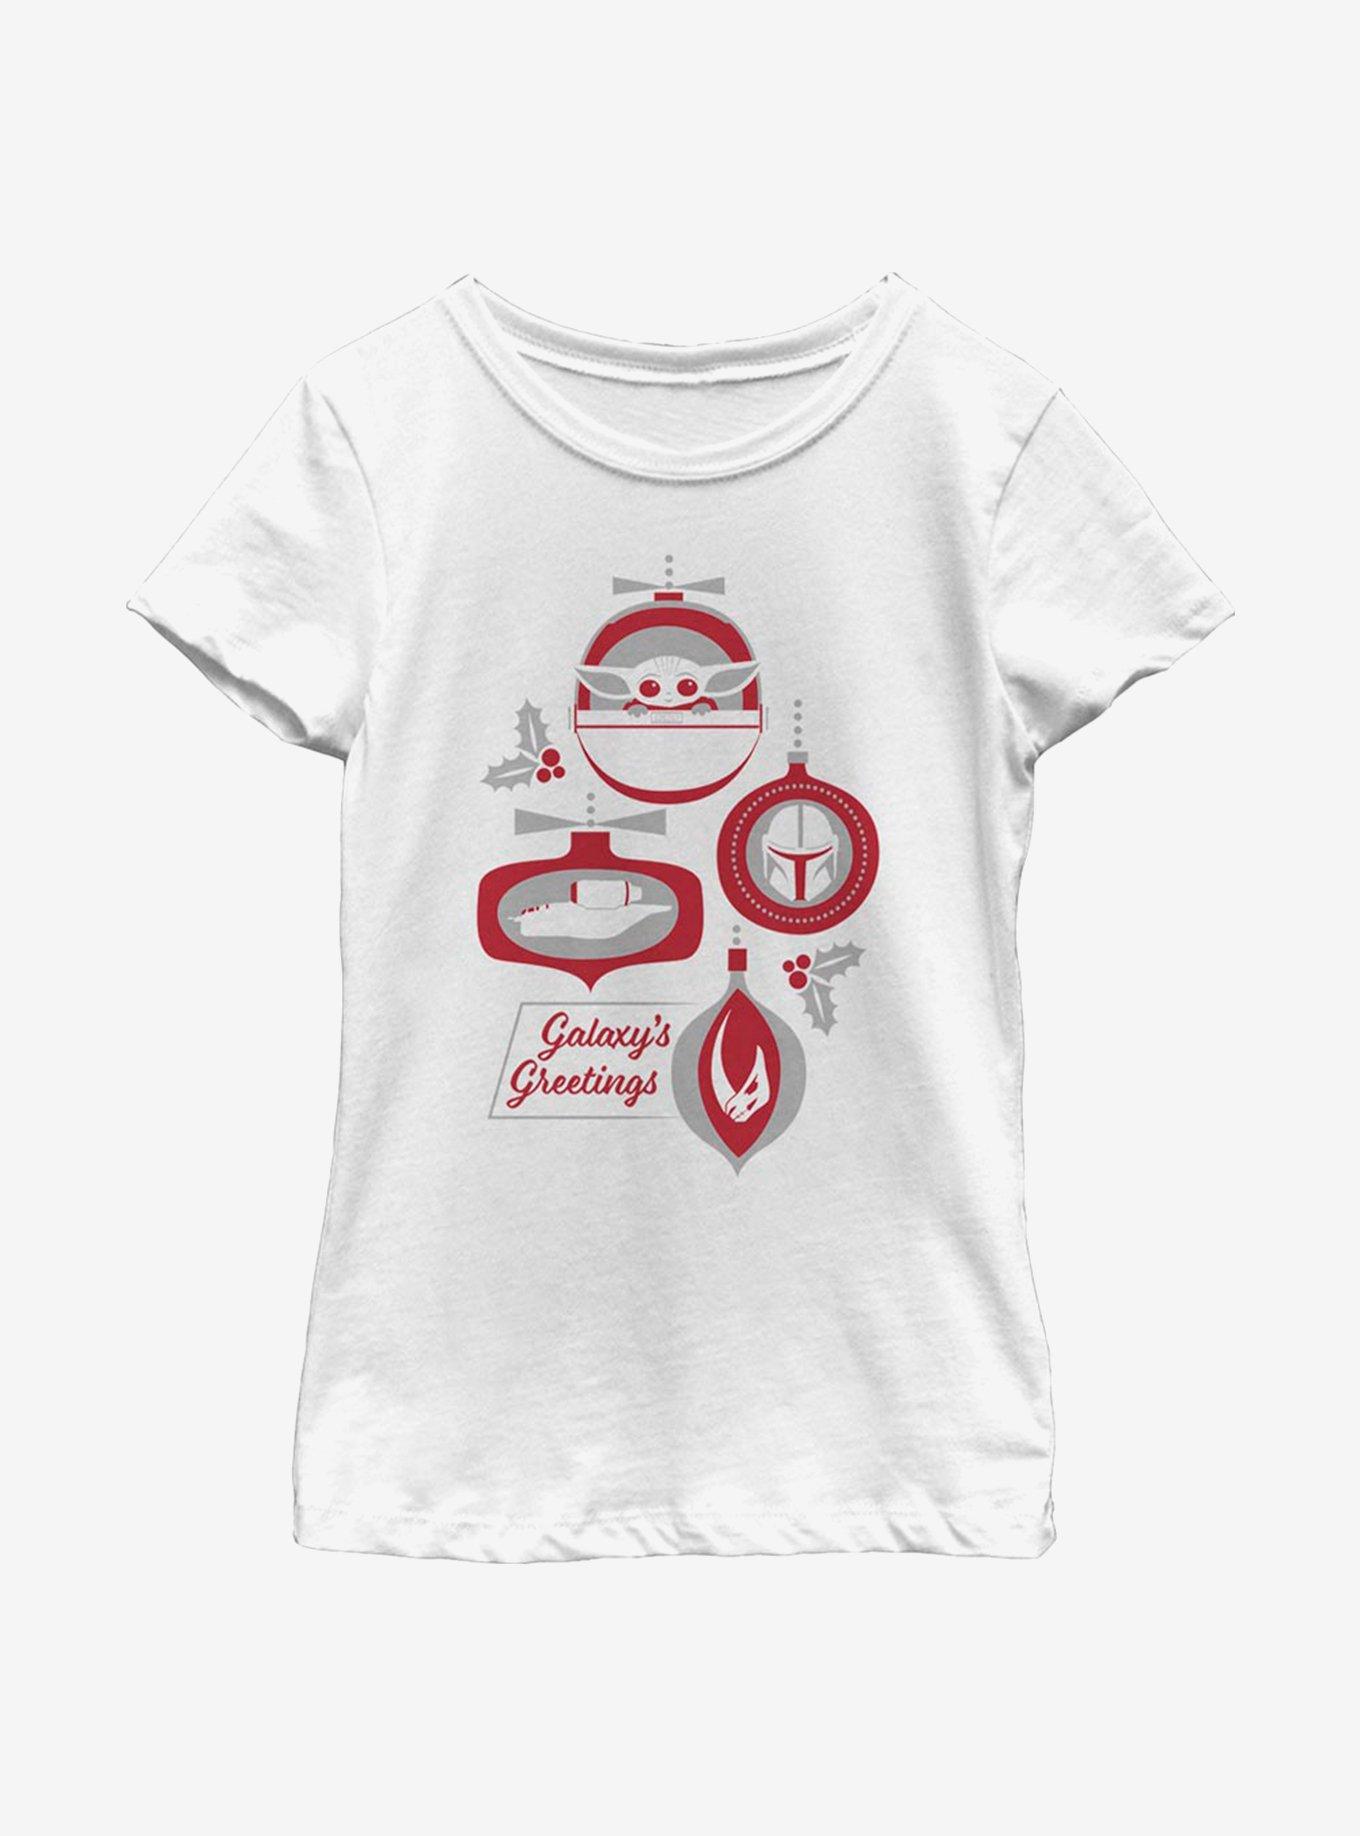 Star Wars The Mandalorian The Child Galaxy's Greetings Youth Girls T-Shirt, WHITE, hi-res